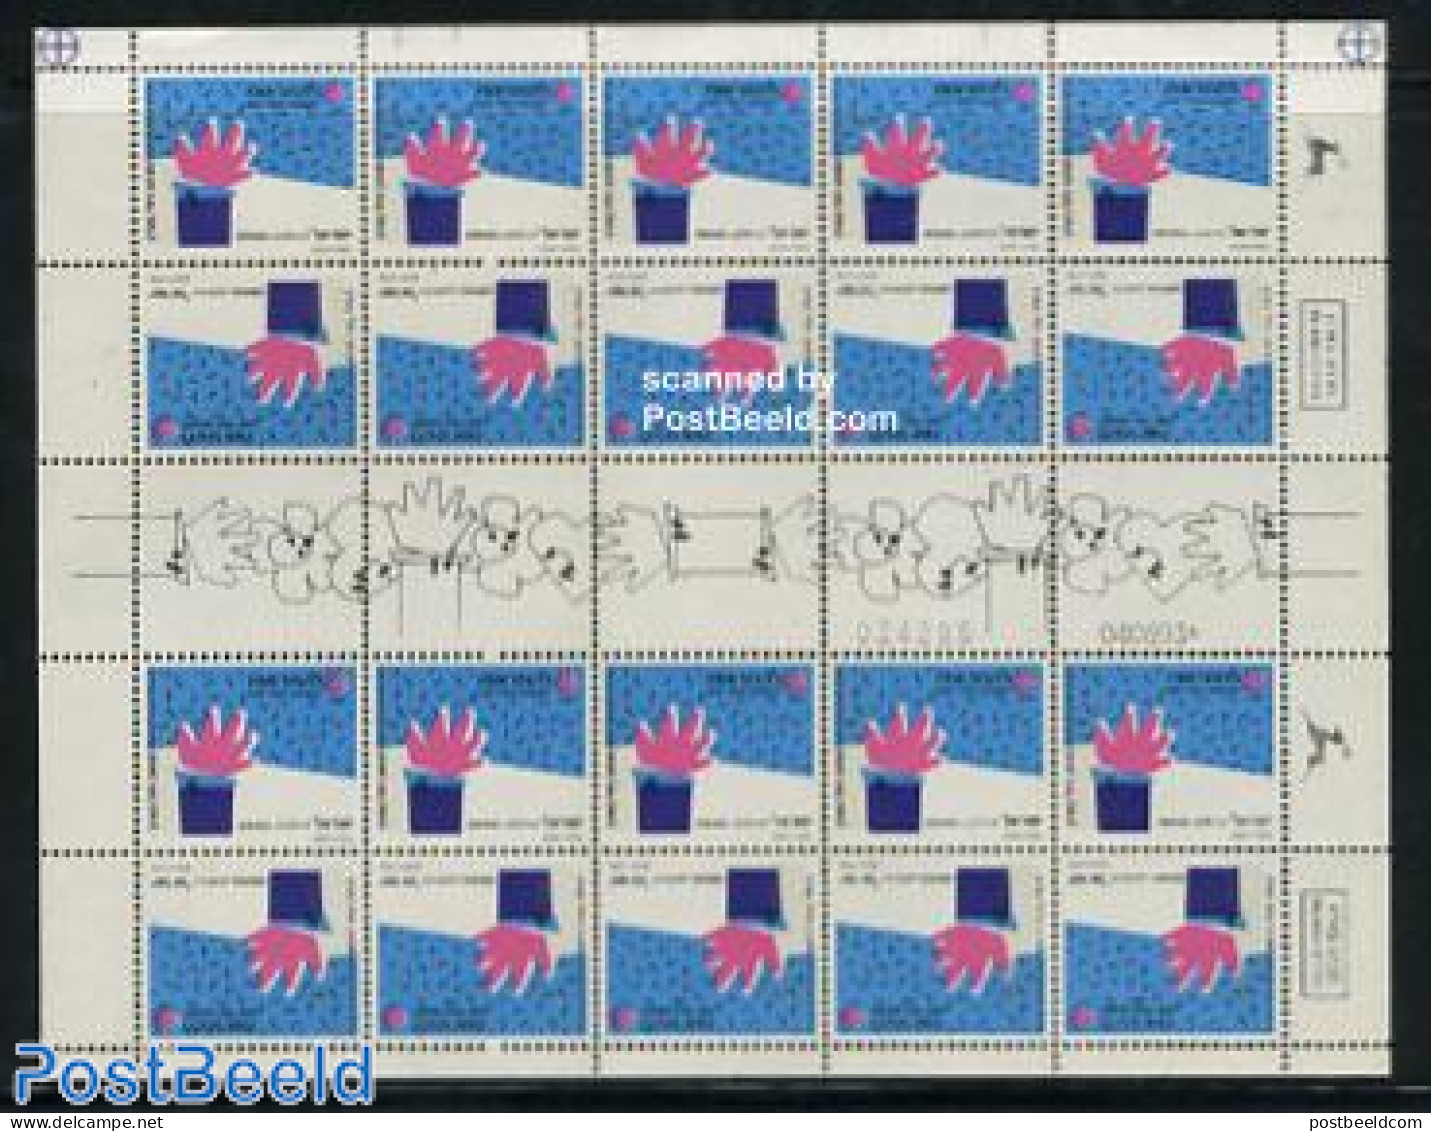 Israel 1989 Greeting Stamps M/s, Mint NH - Nuovi (con Tab)